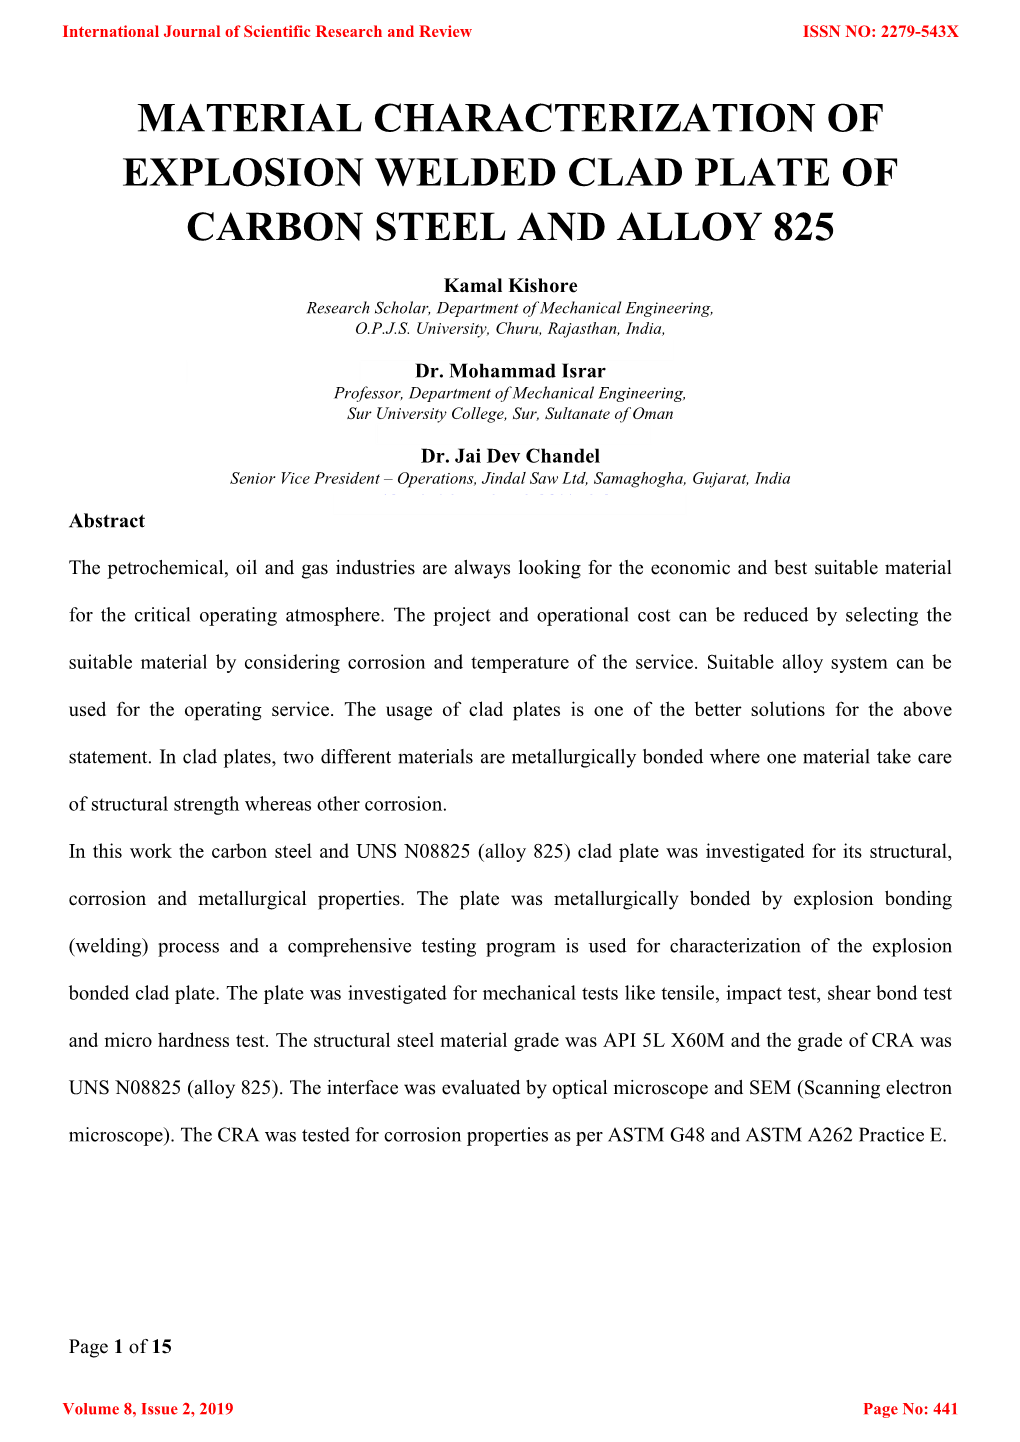 Material Characterization of Explosion Welded Clad Plate of Carbon Steel and Alloy 825